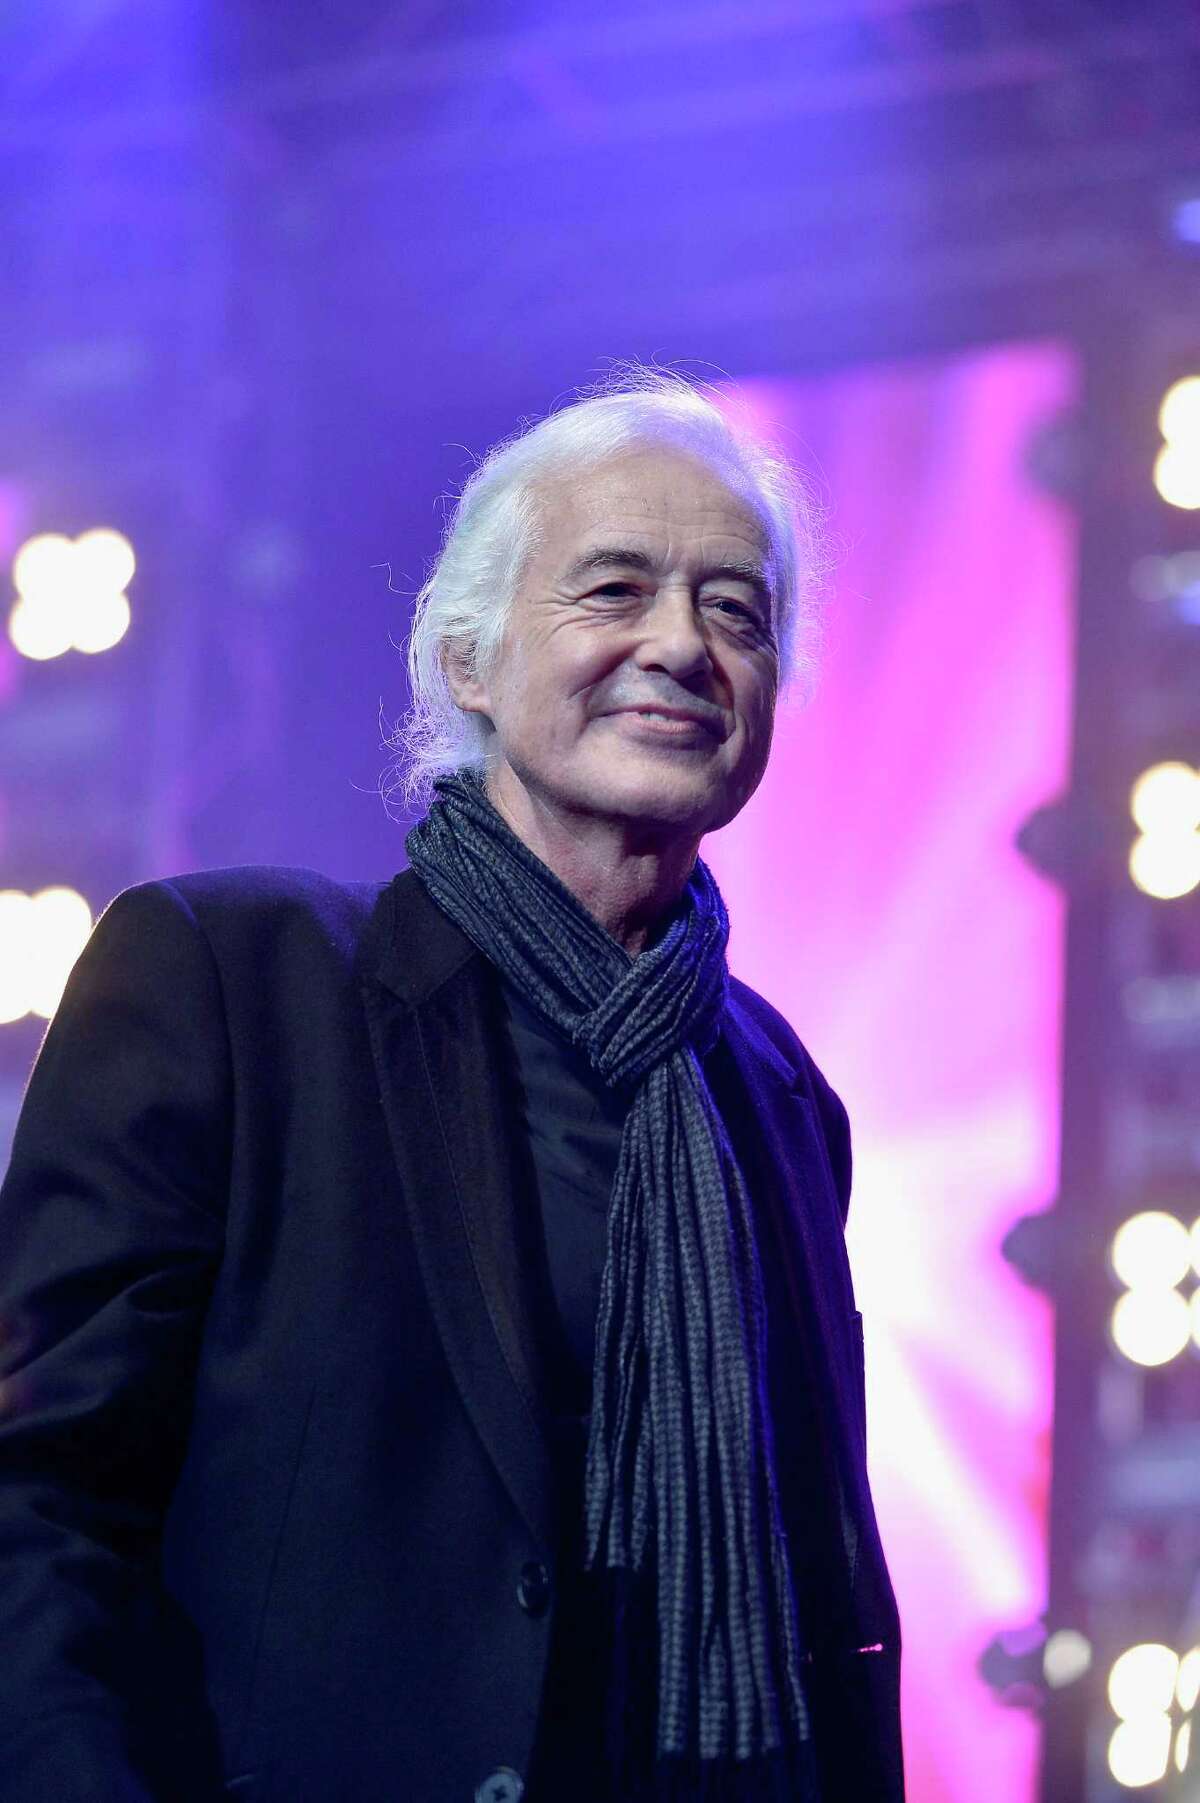 Jimmy Page, 70 The former Led Zeppelin guitarist has been working on reissues of that band's catalogue and hints to Rolling Stone that he'll have new solo music in 2015.